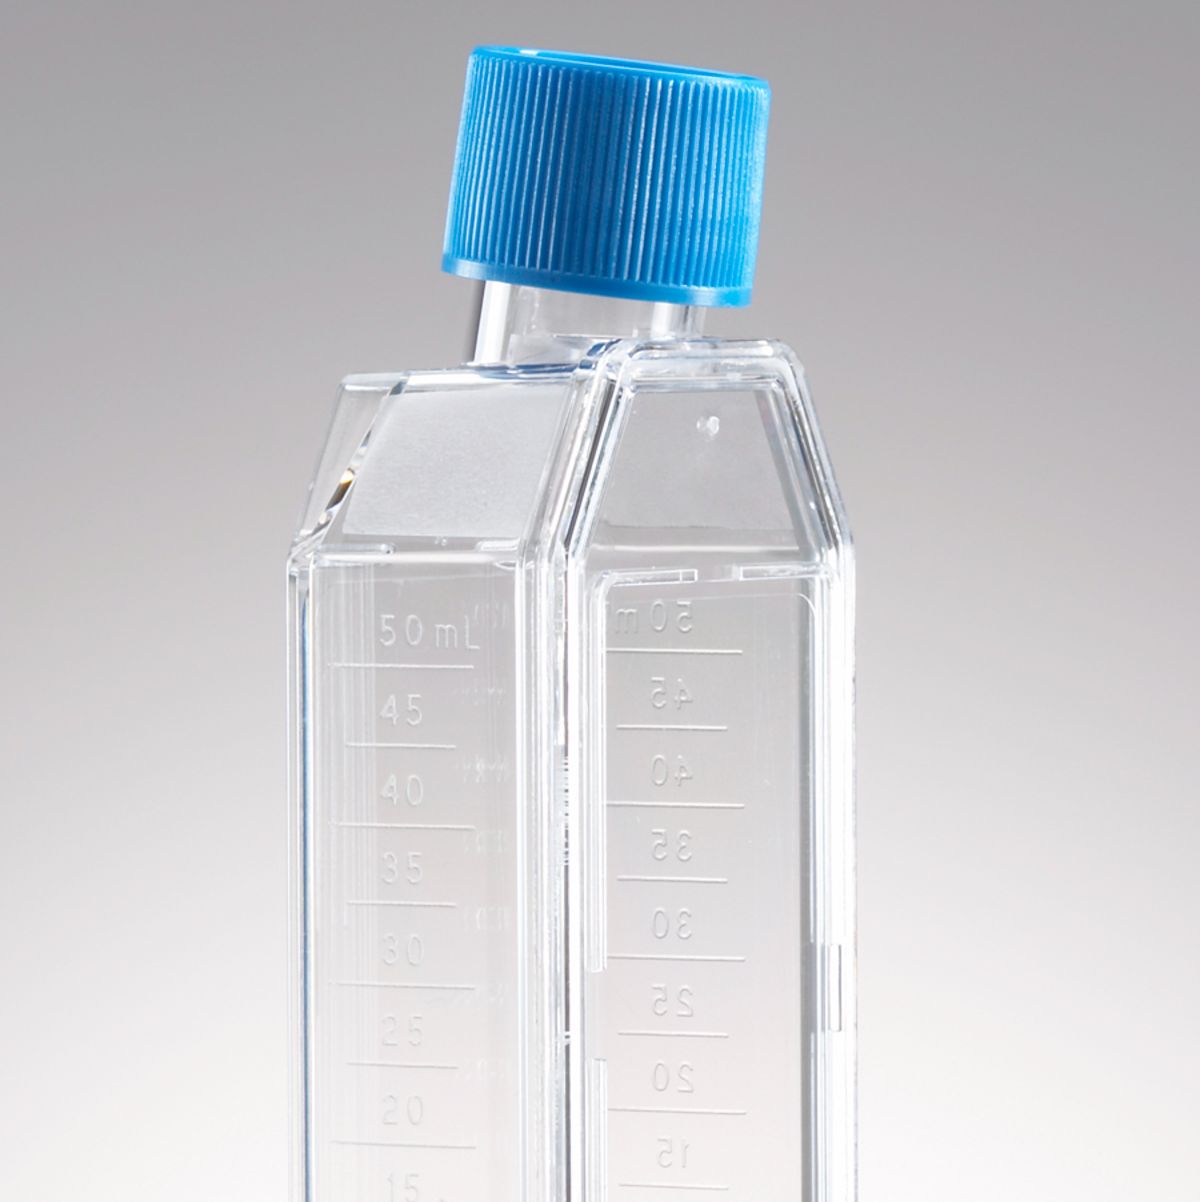 Corning® Primaria™ 25cm² Rectangular Canted Neck Cell Culture Flask with Vented Cap  Corning® Primaria Flask 25cm² 矩形斜颈细胞培养瓶，带通风盖